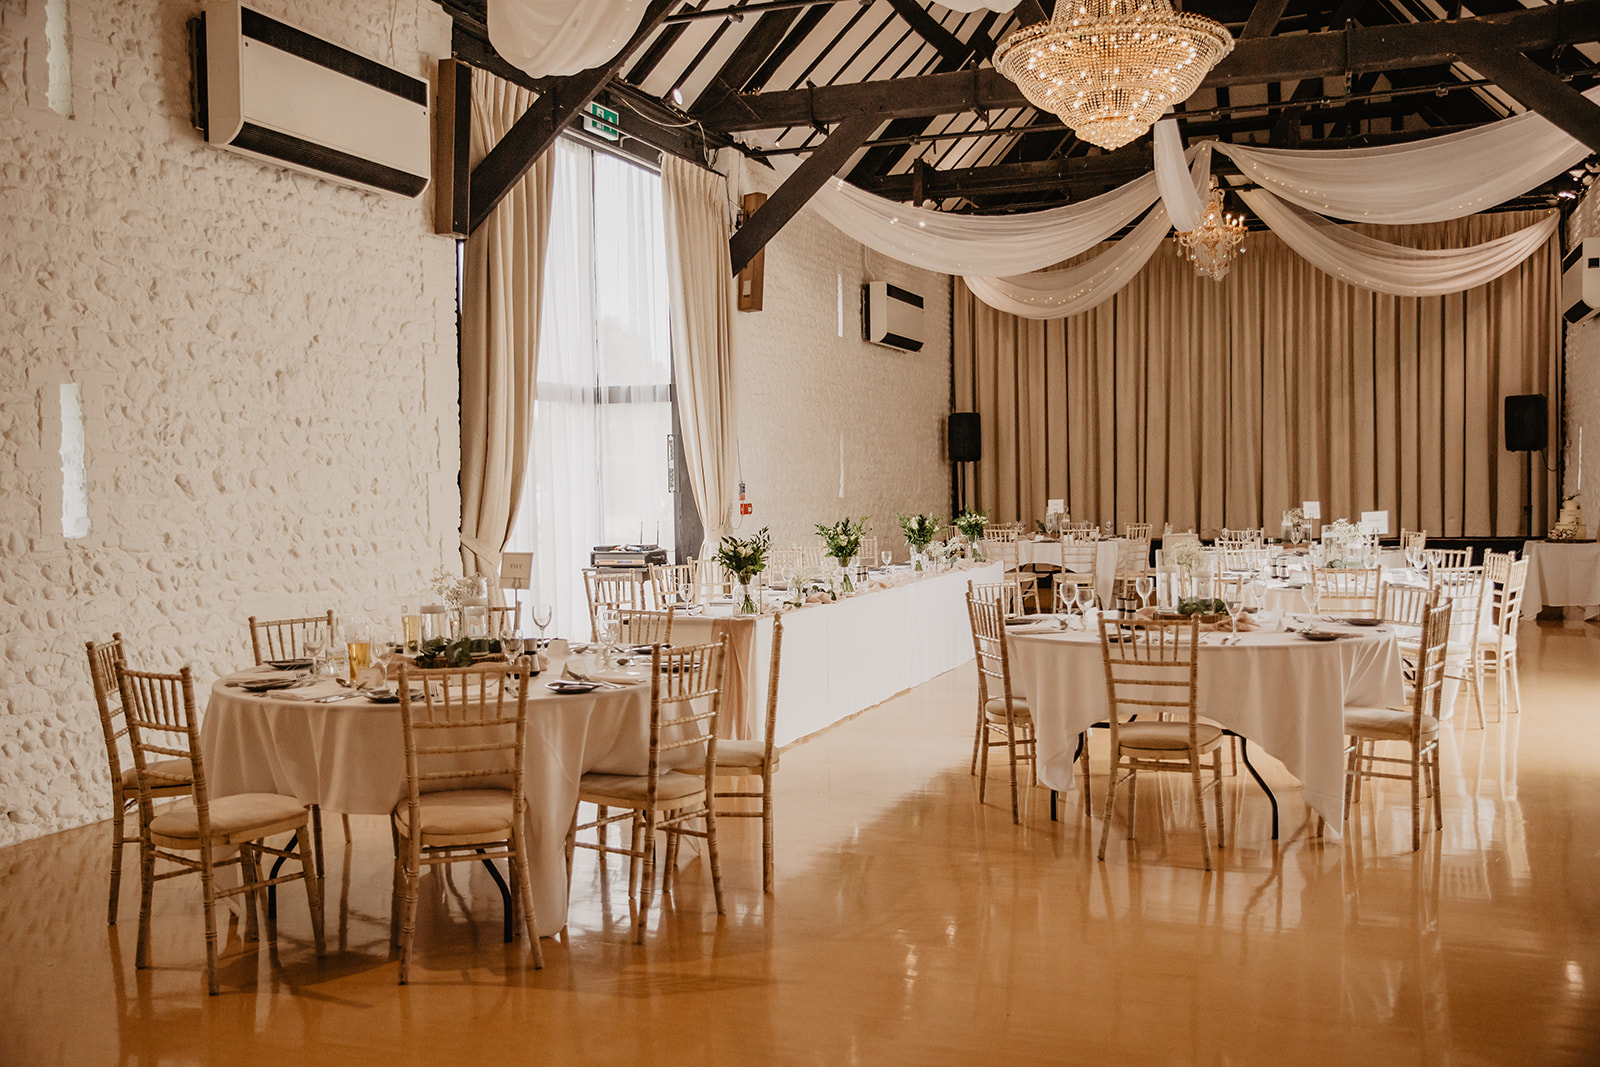 Wedding reception at a Field Place Manor House Wedding in Worthing, Sussex. By Olive Joy Photography